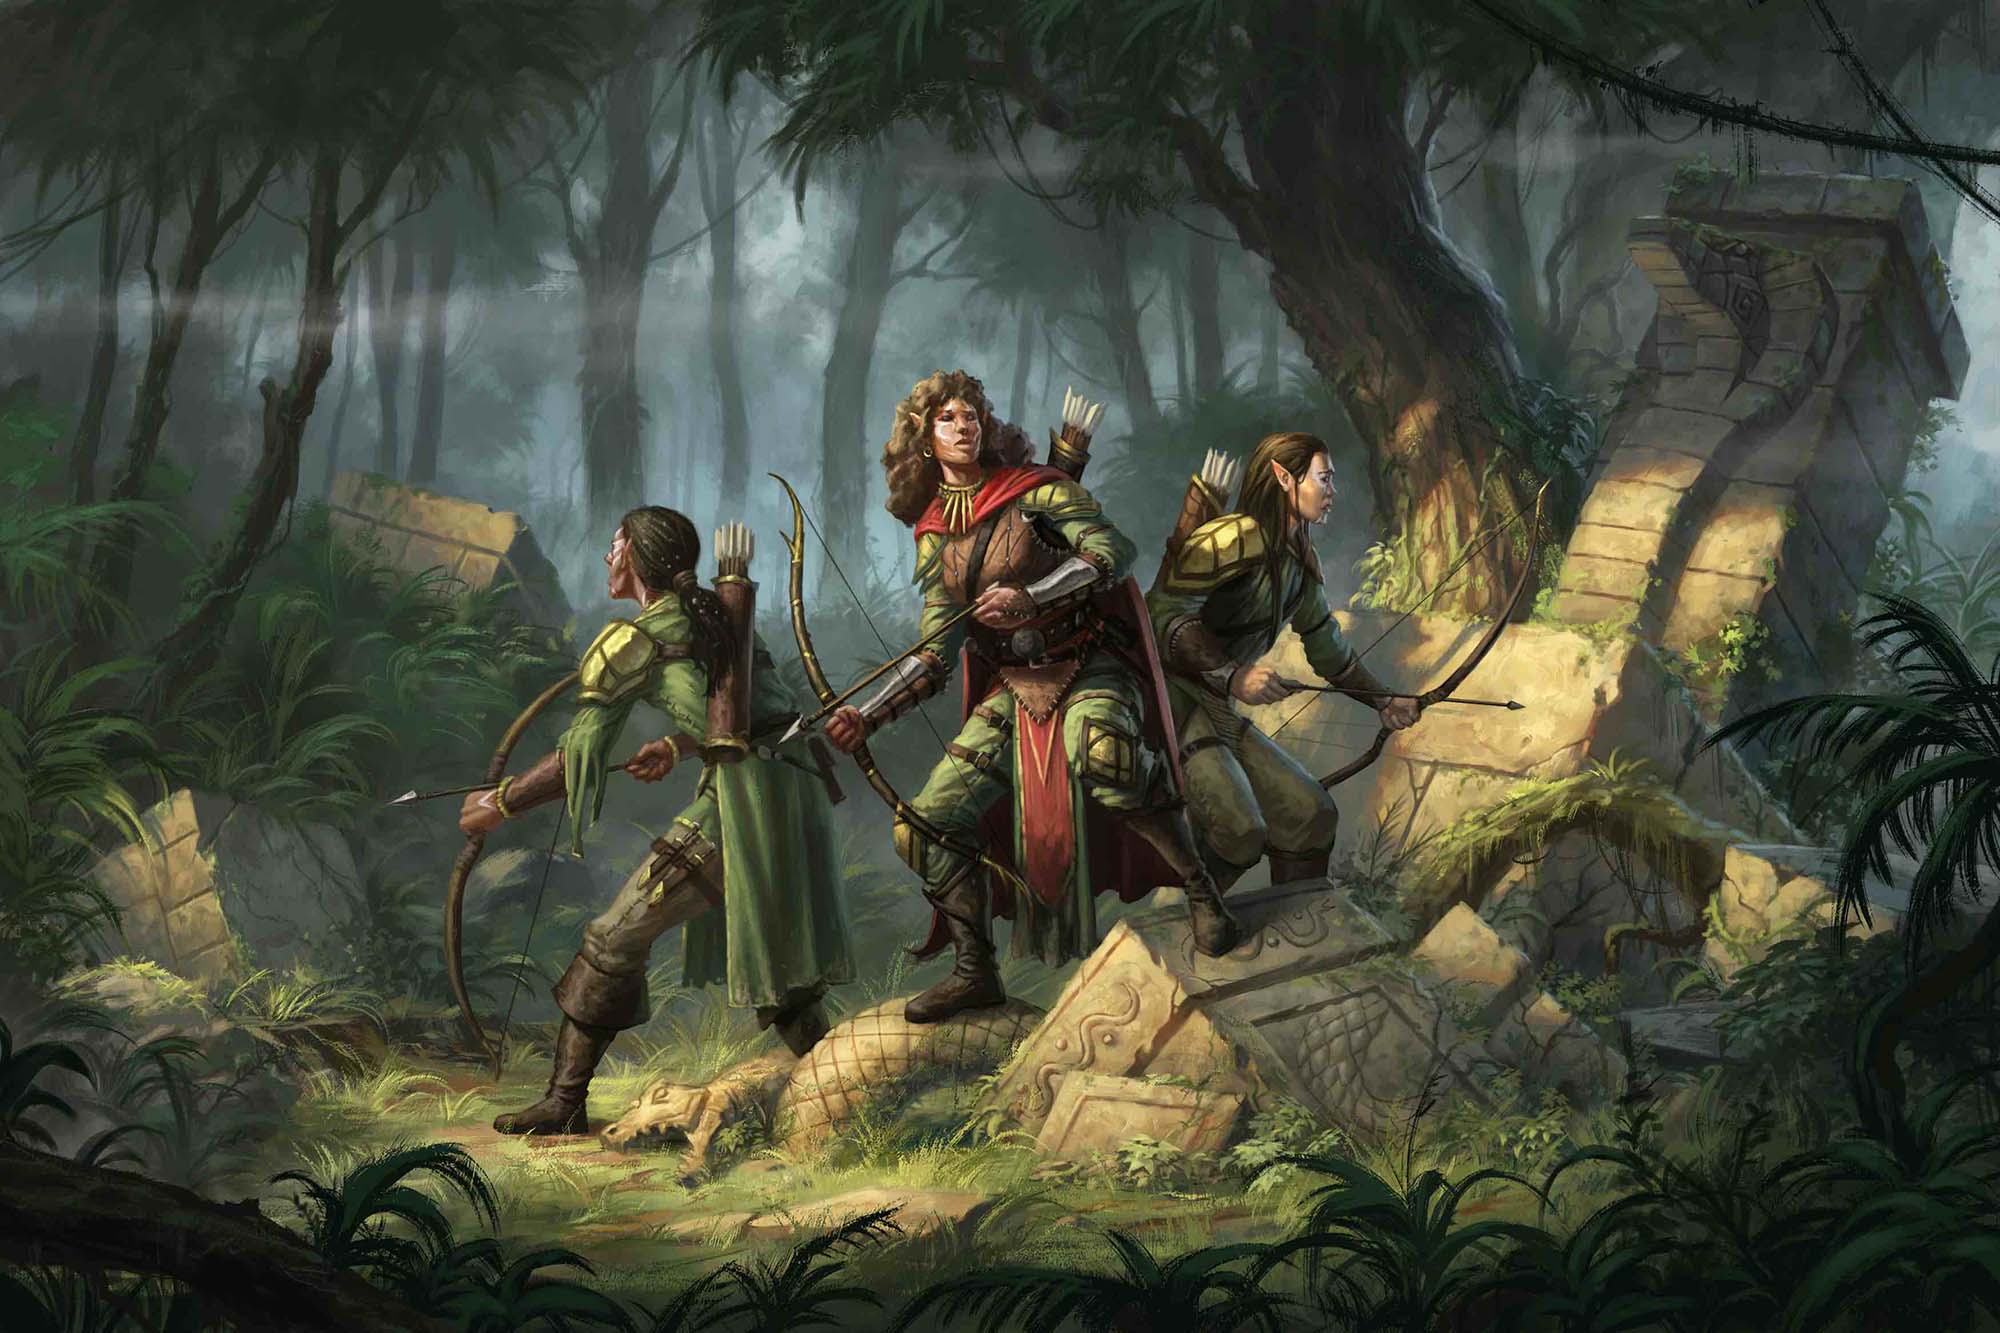 Three elves, in green and brown leather armor, stand back to back in overgrown ruins deep in a forest